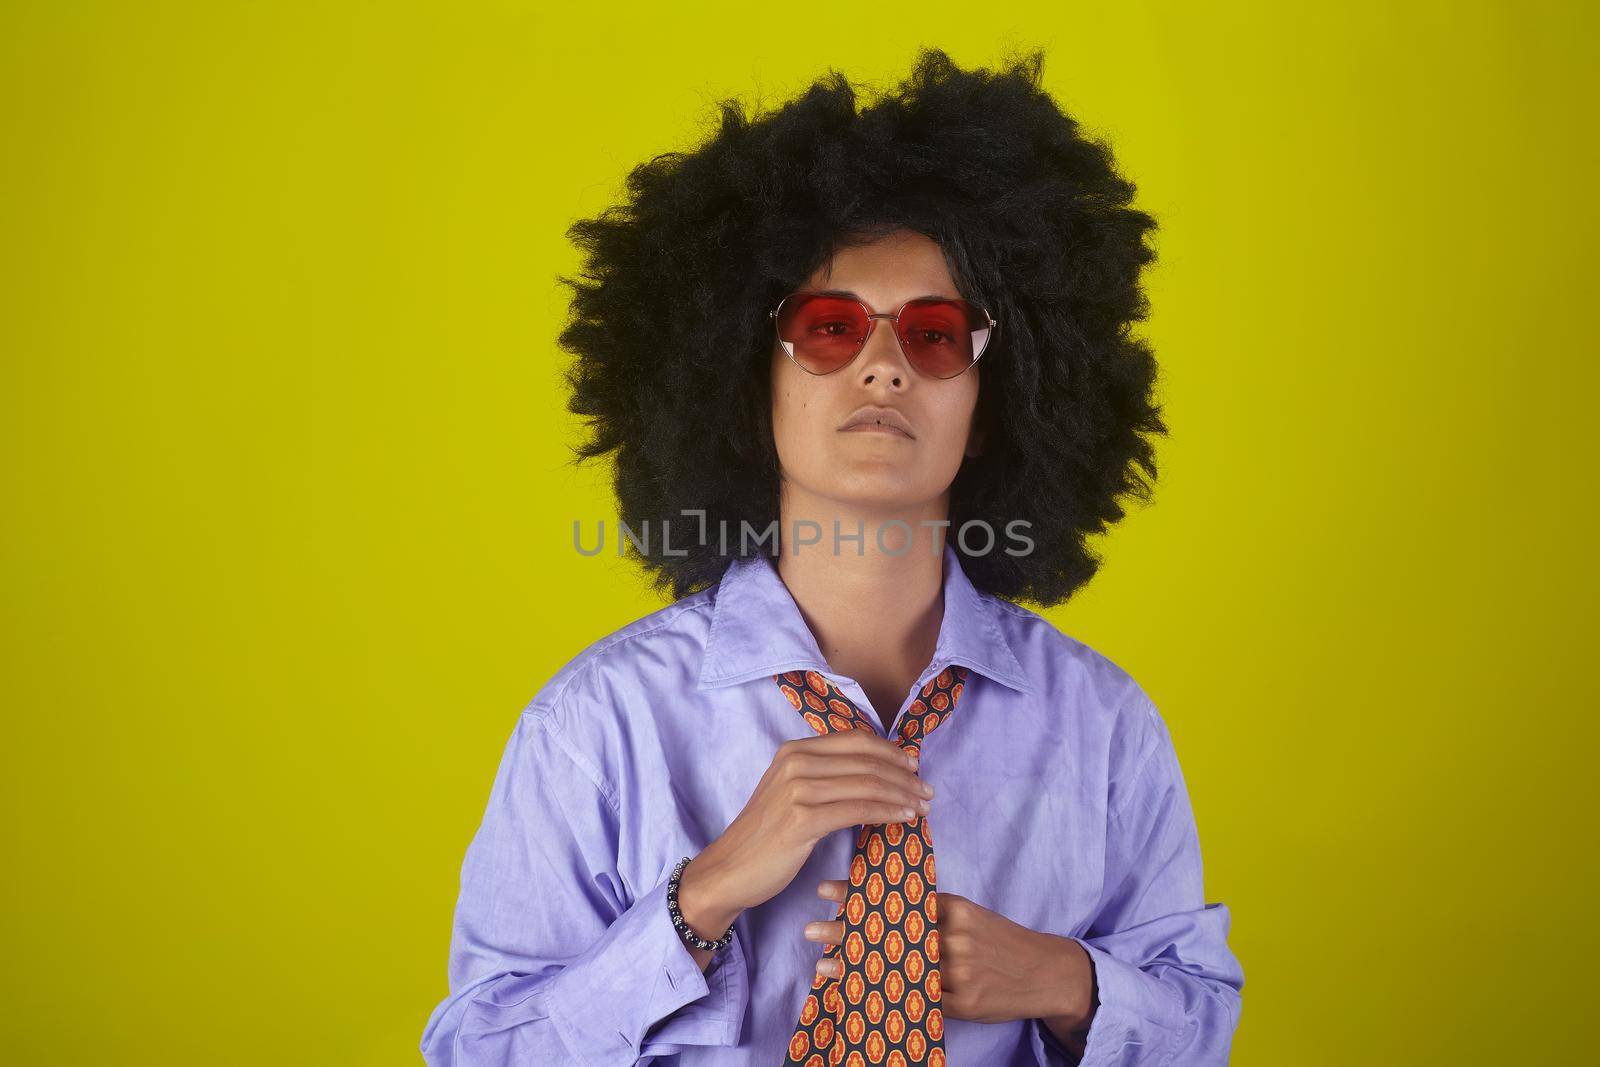 Young woman with afro curly hairstyle wearing male clothes straightening a tie on yellow background by bepsimage